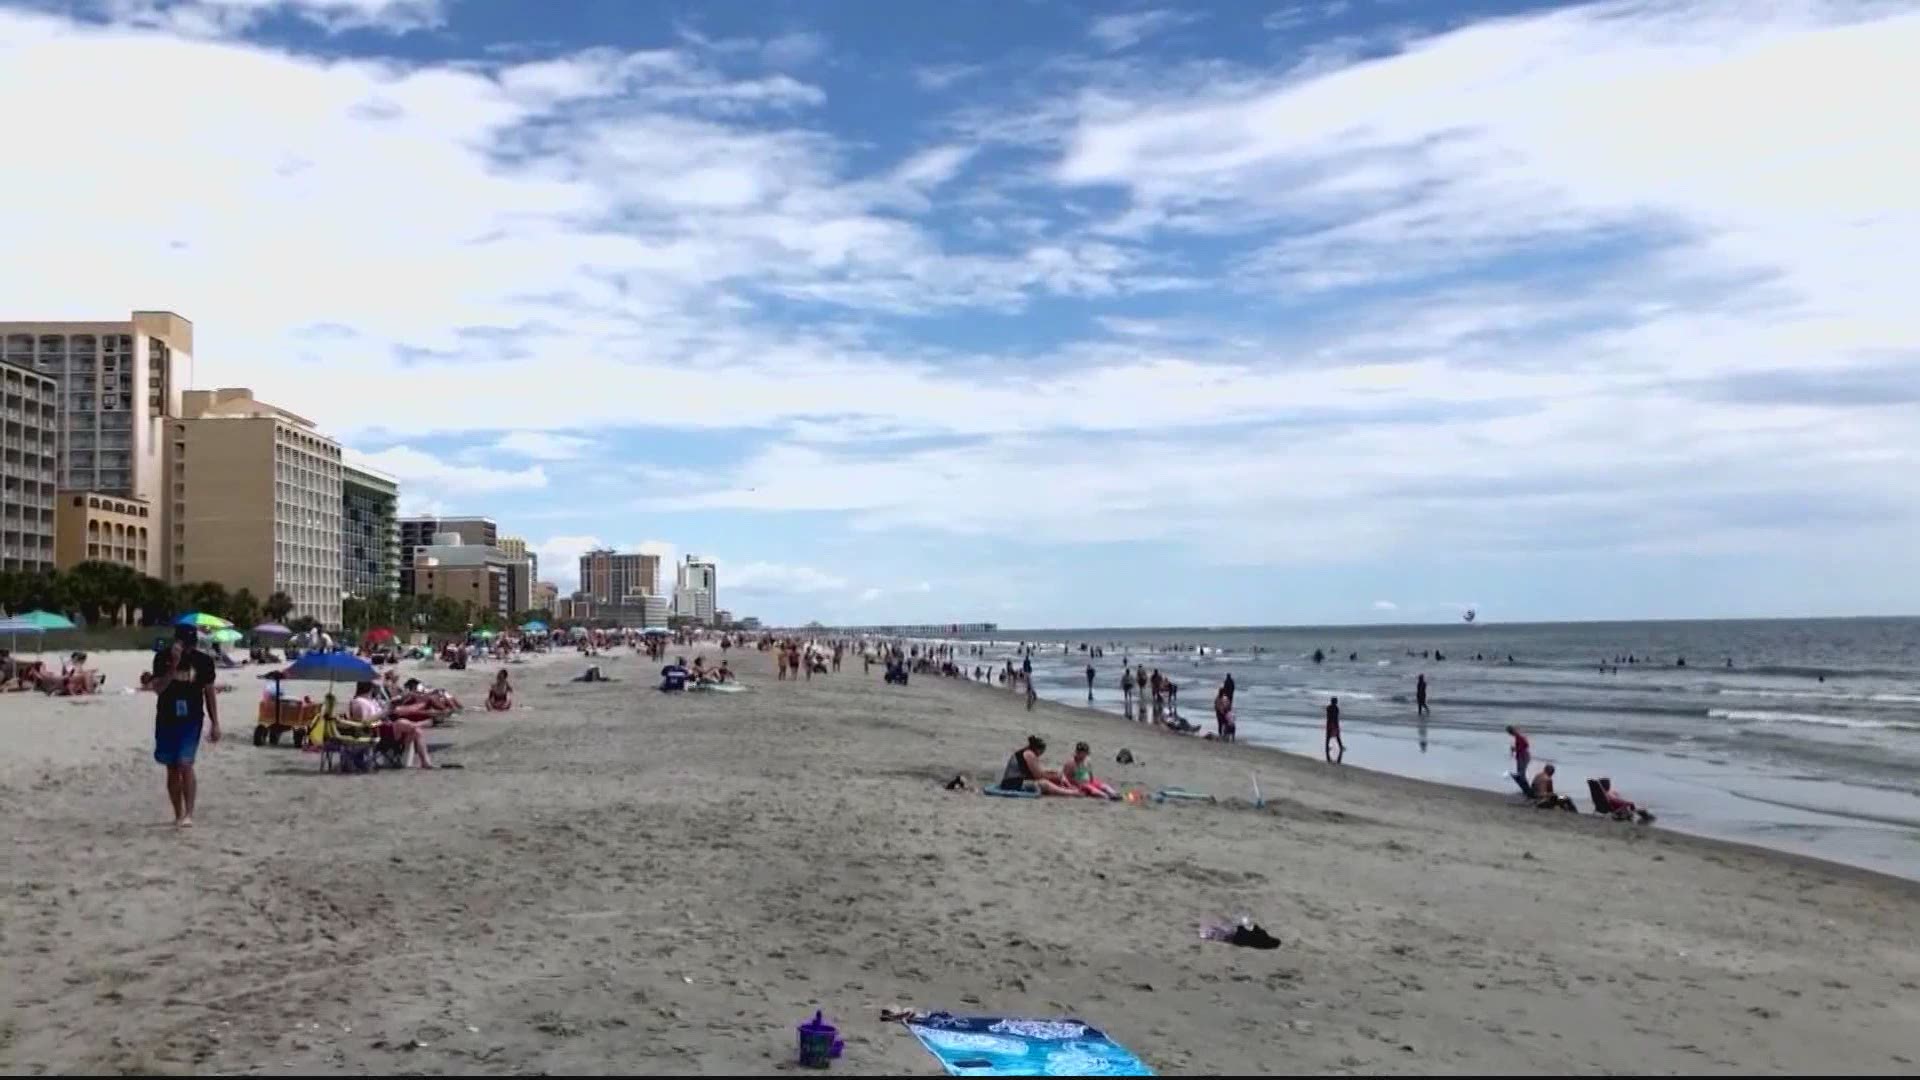 Some beaches across the country reported large crowds over the long weekend.